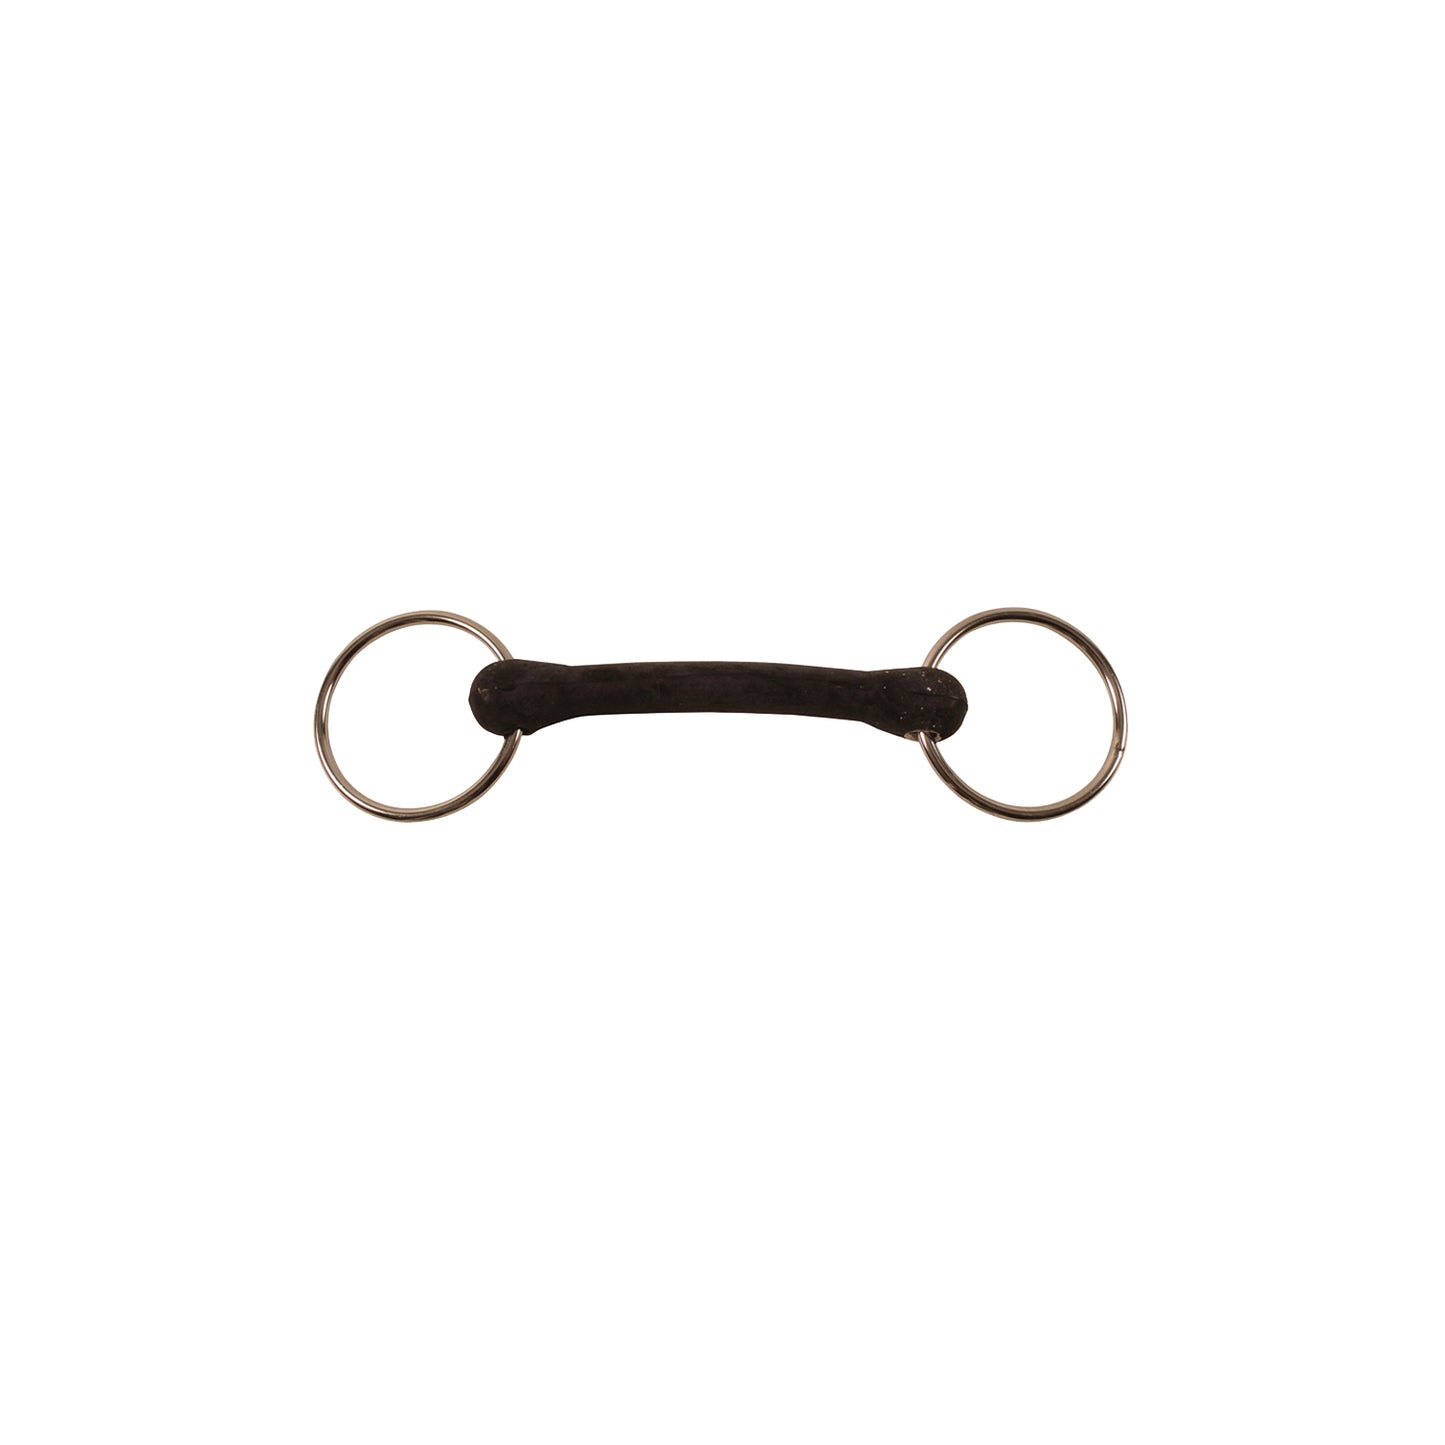 Straight soft rubber loose ring snaffle